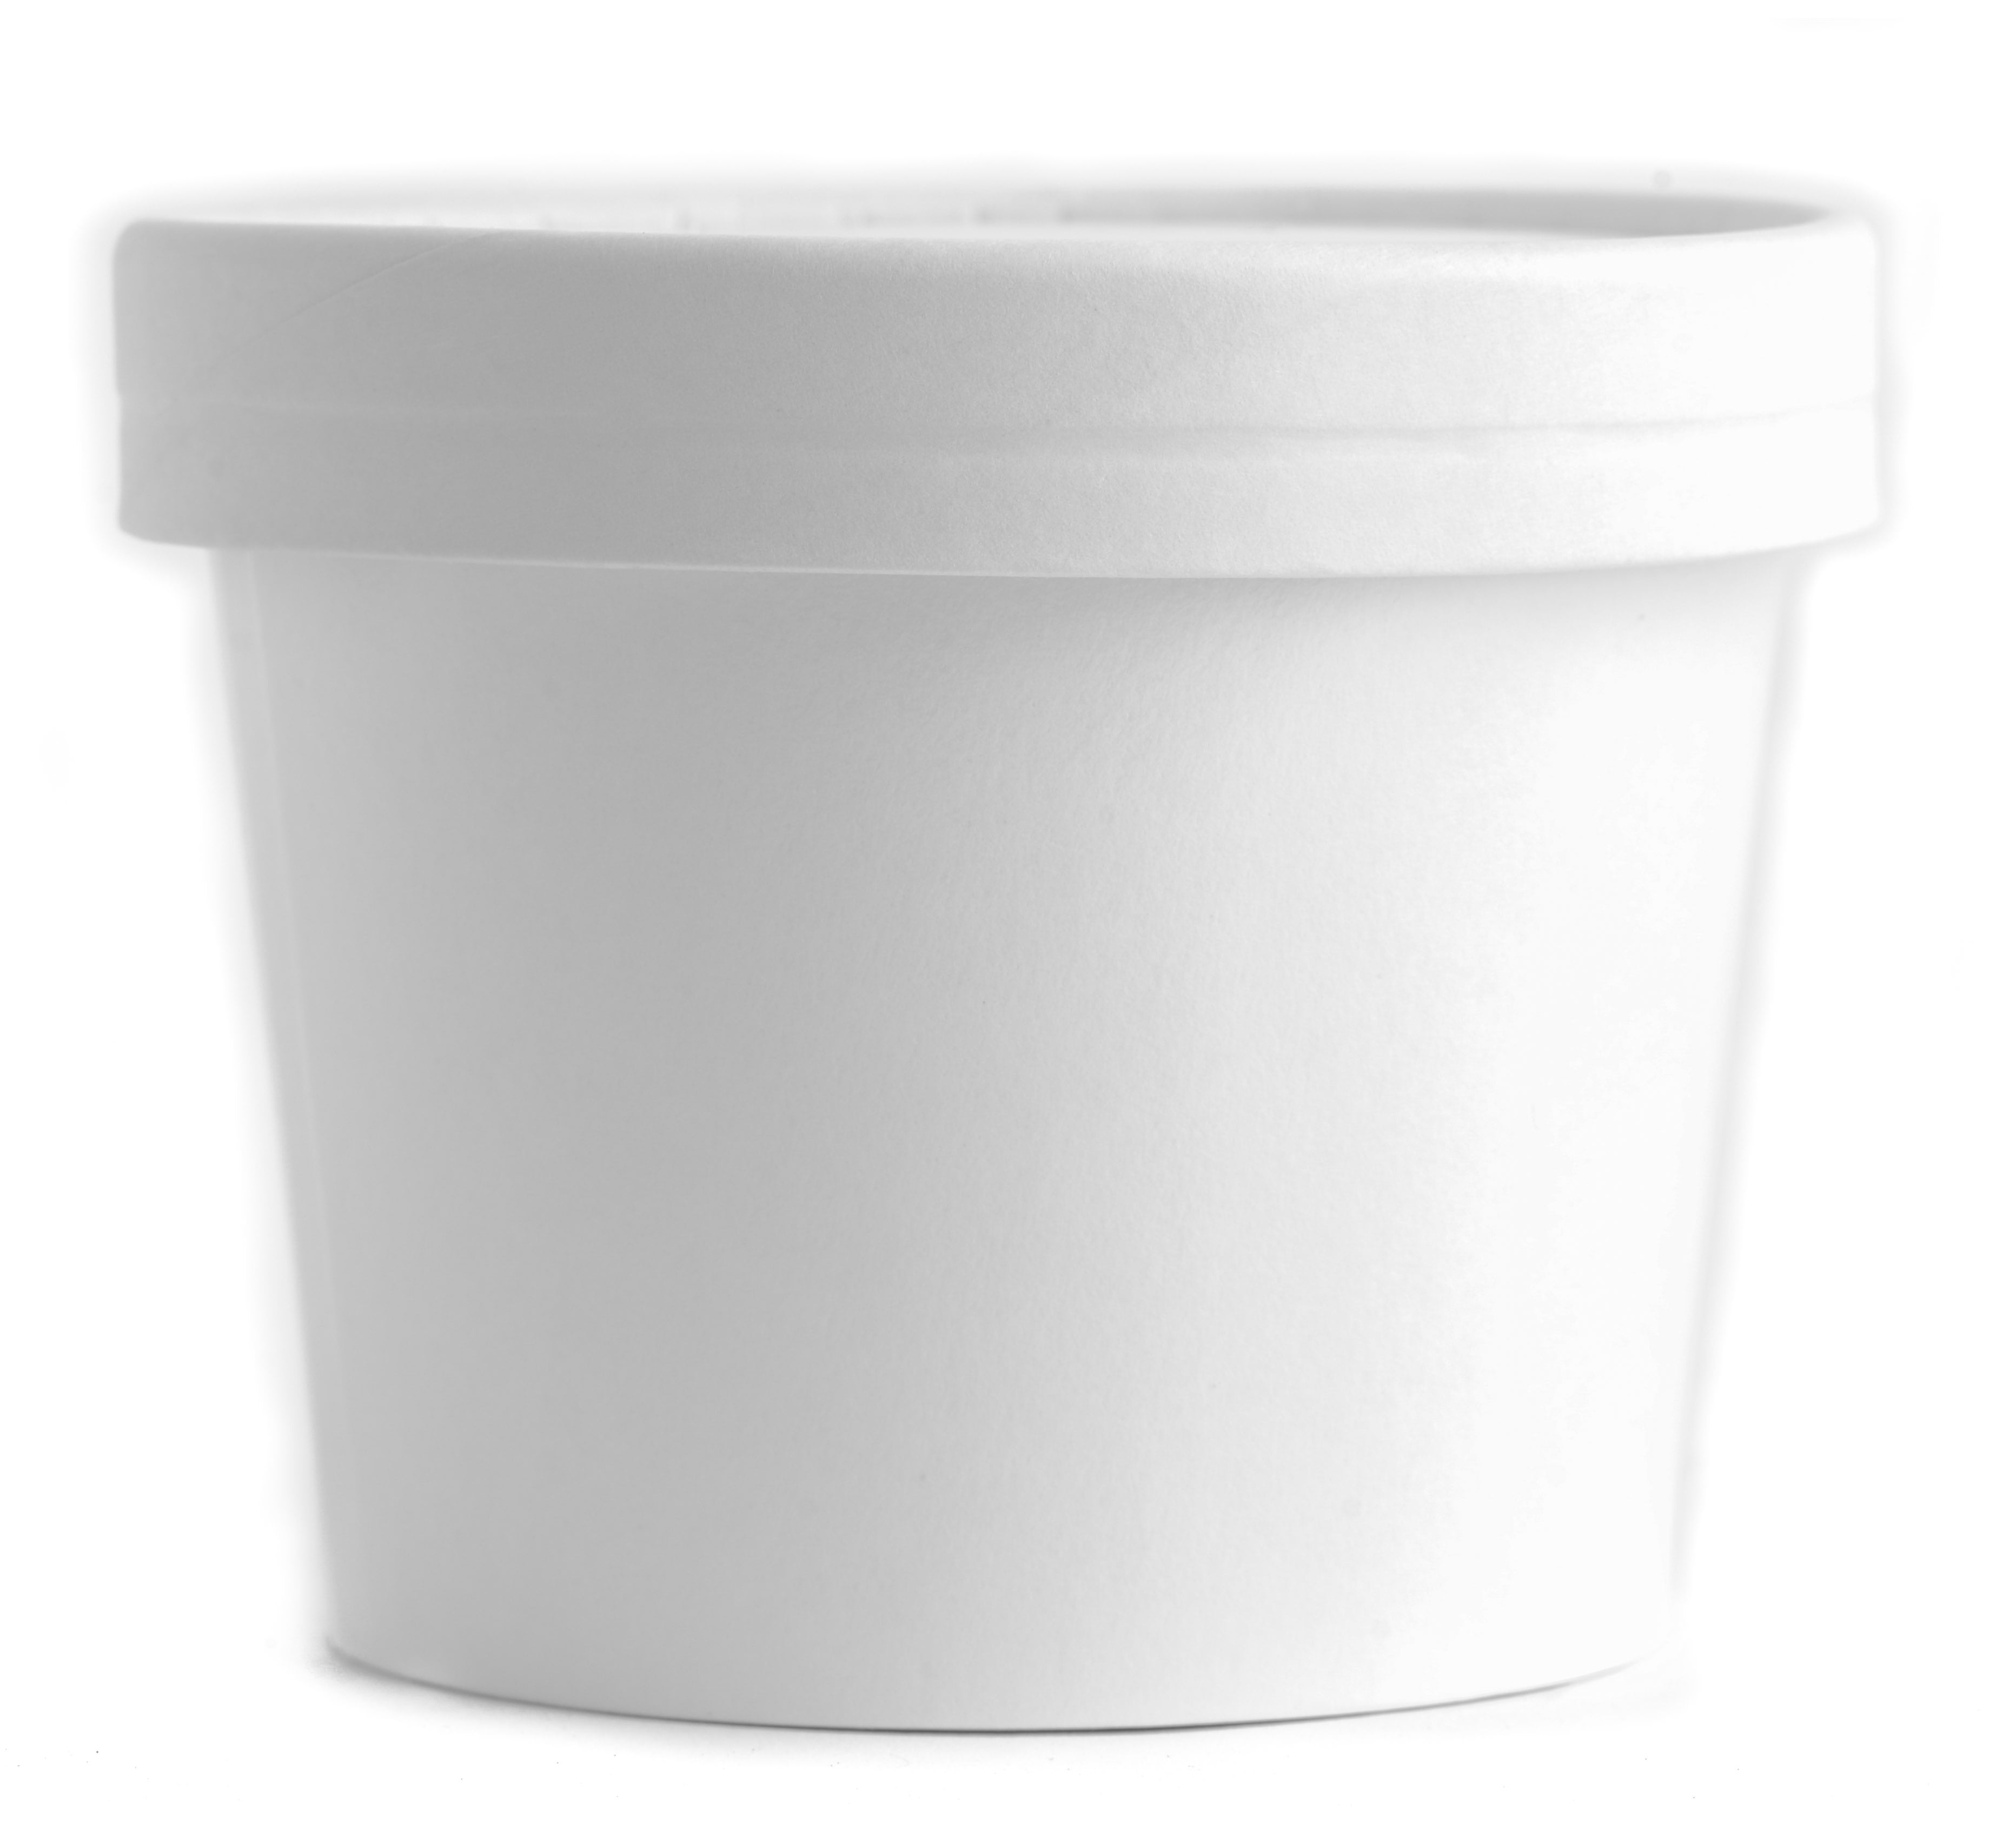 12 OZ ICE CREAM TUBS WITH DOME LIDS PACK OF 200 